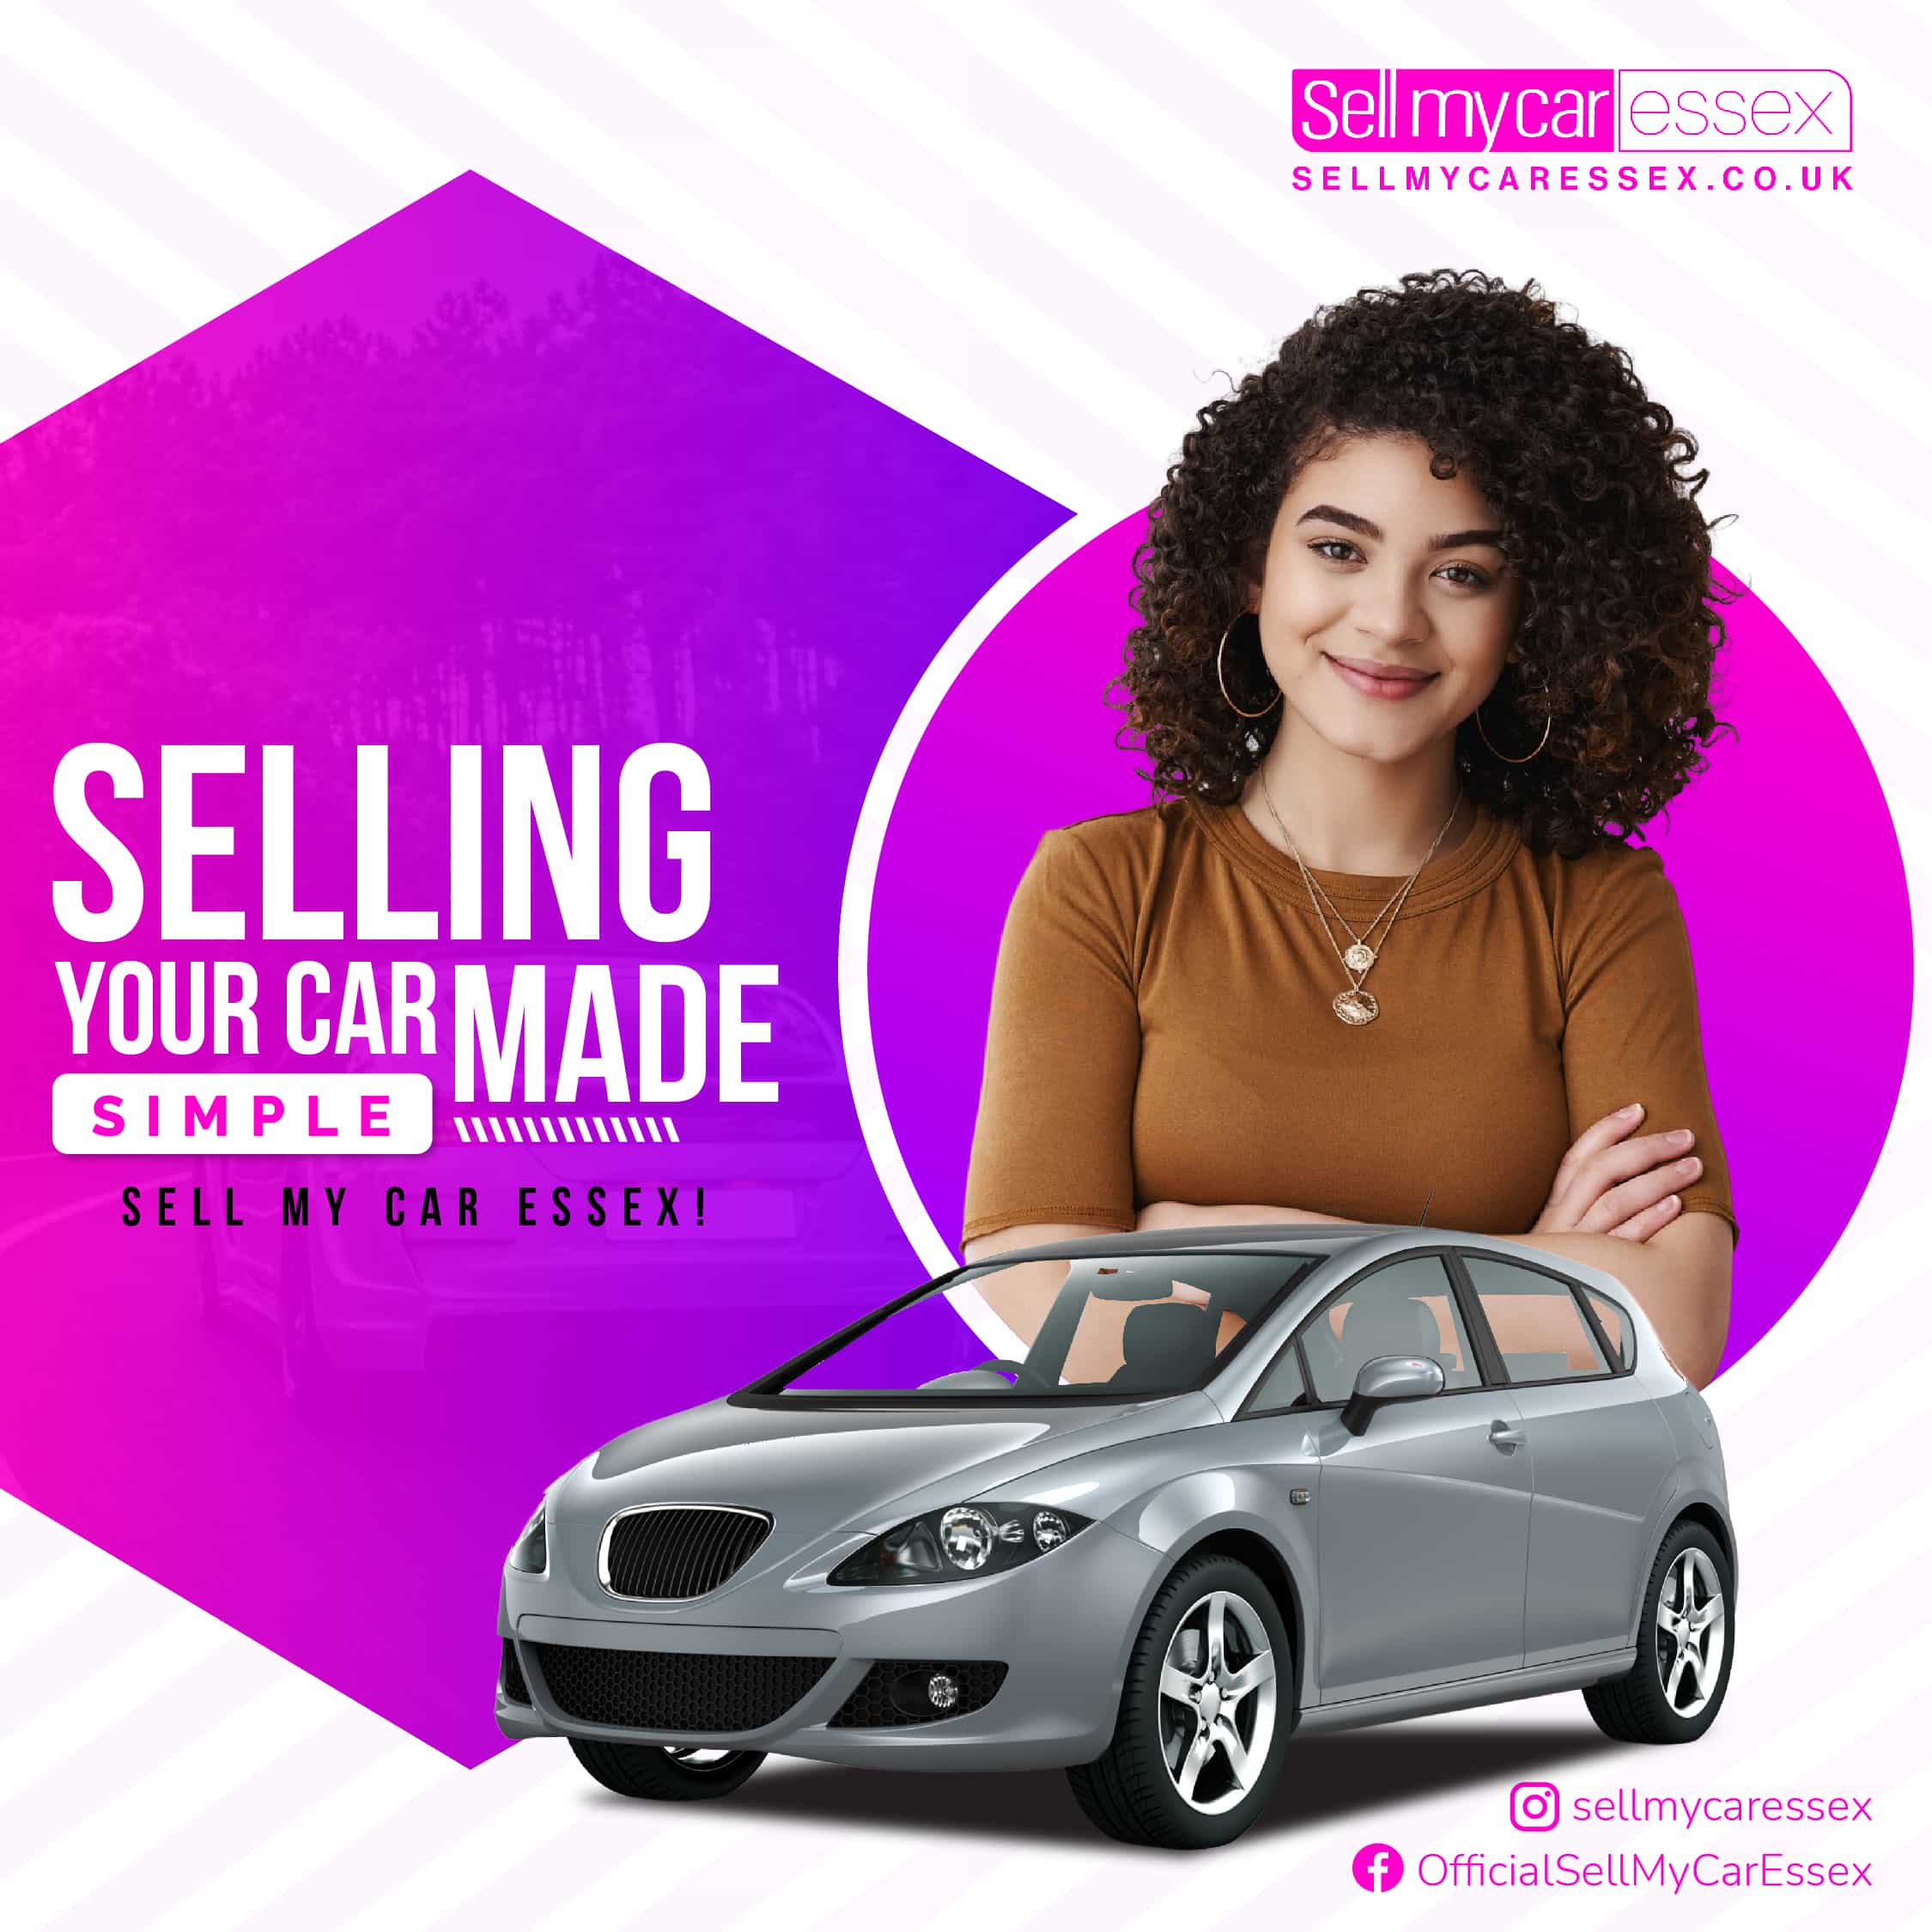 Sell Your car made simple